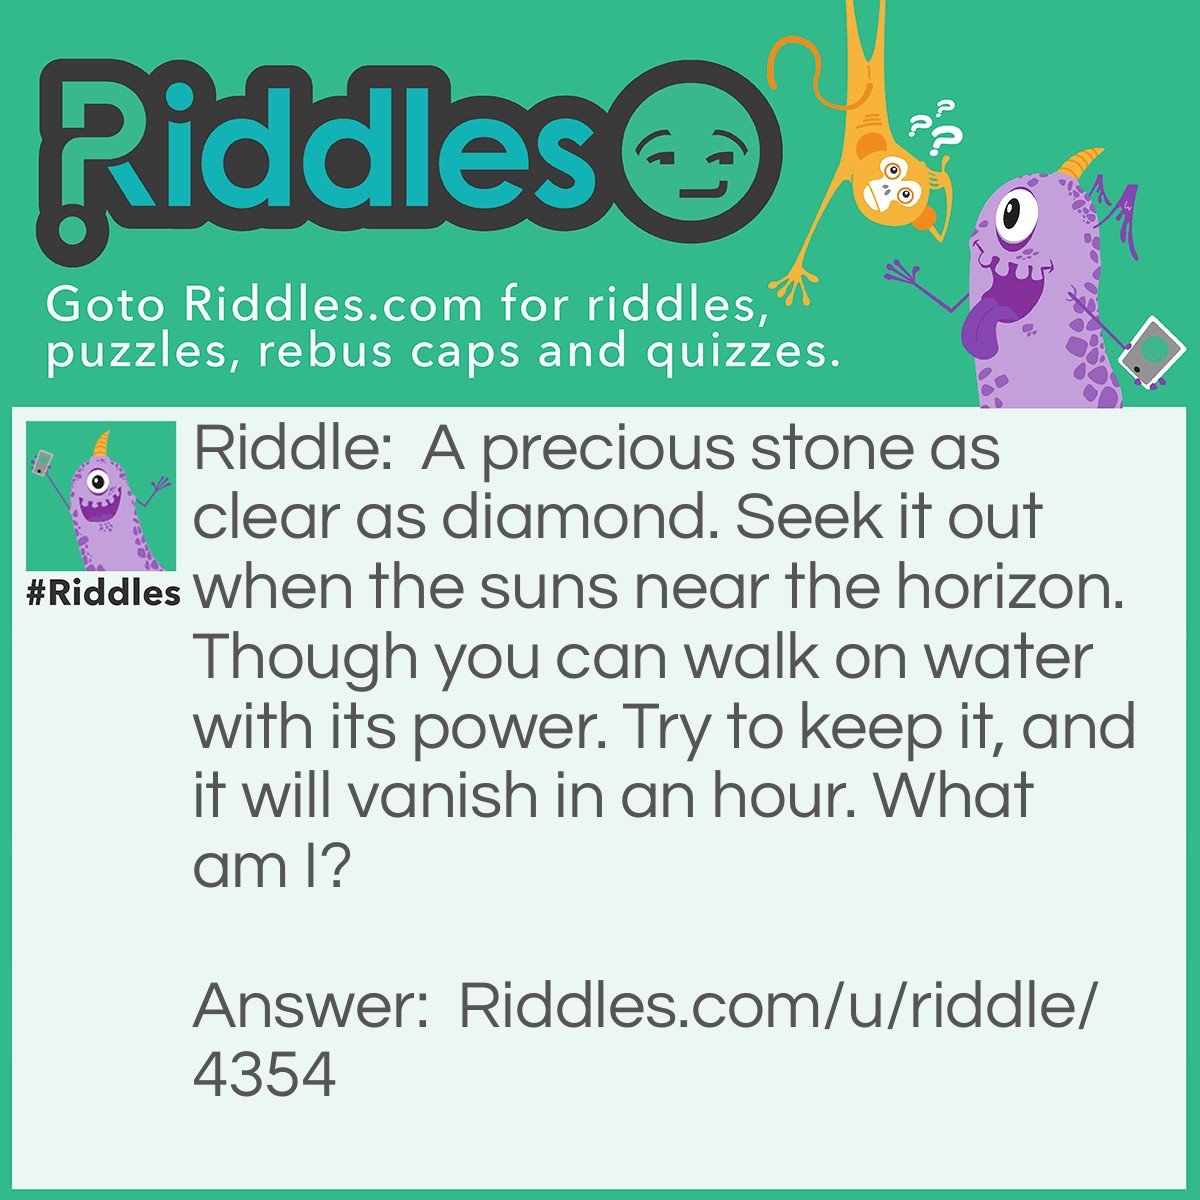 Riddle: A precious stone as clear as diamond. Seek it out when the suns near the horizon. Though you can walk on water with its power. Try to keep it, and it will vanish in an hour. What am I? Answer: Ice.